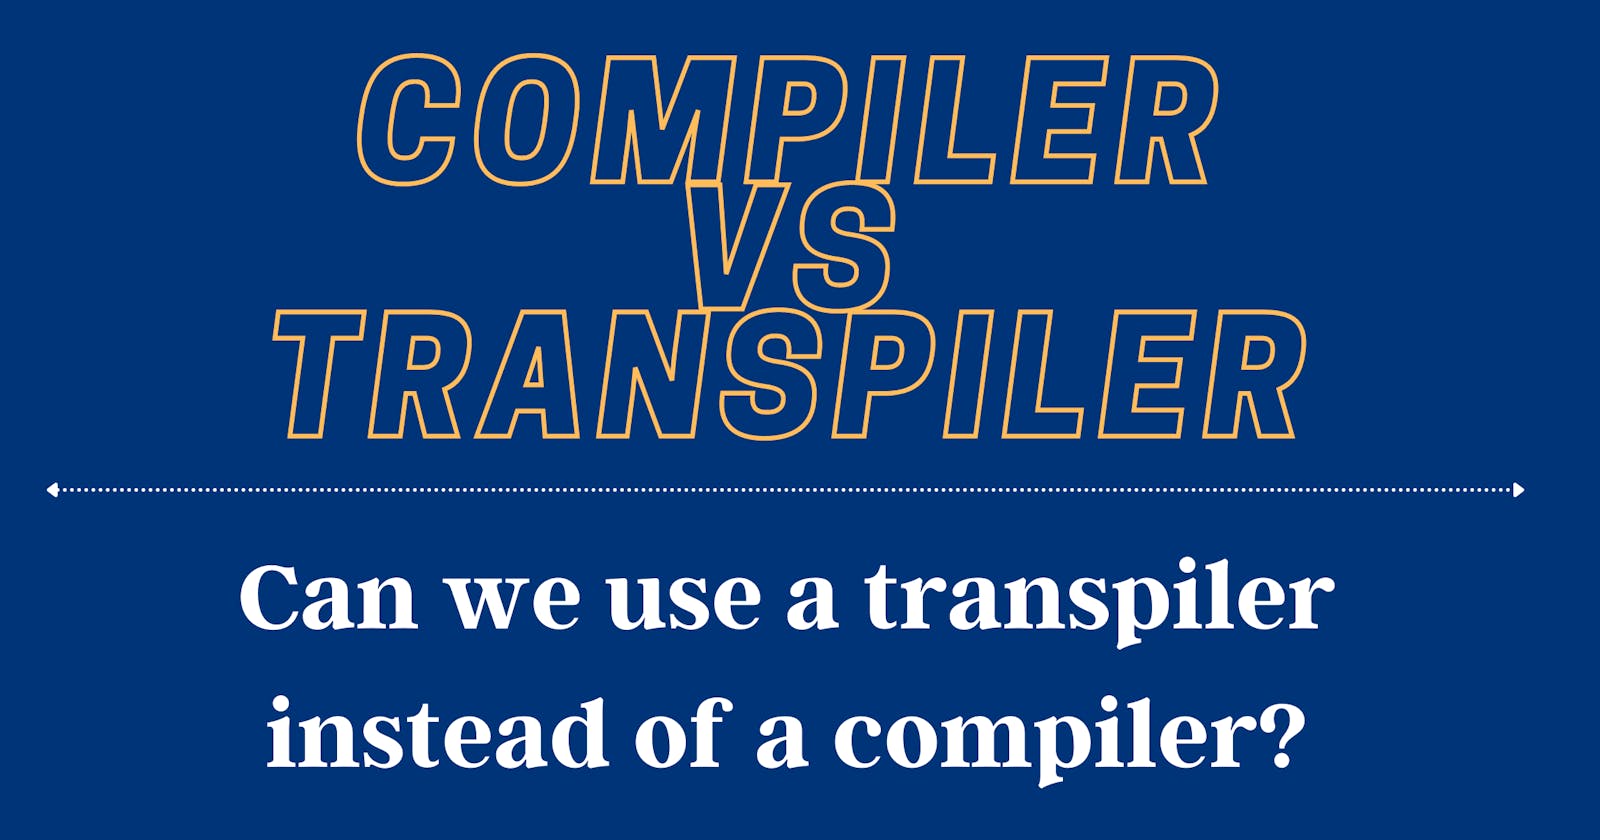 Can we use a transpiler instead of a compiler?